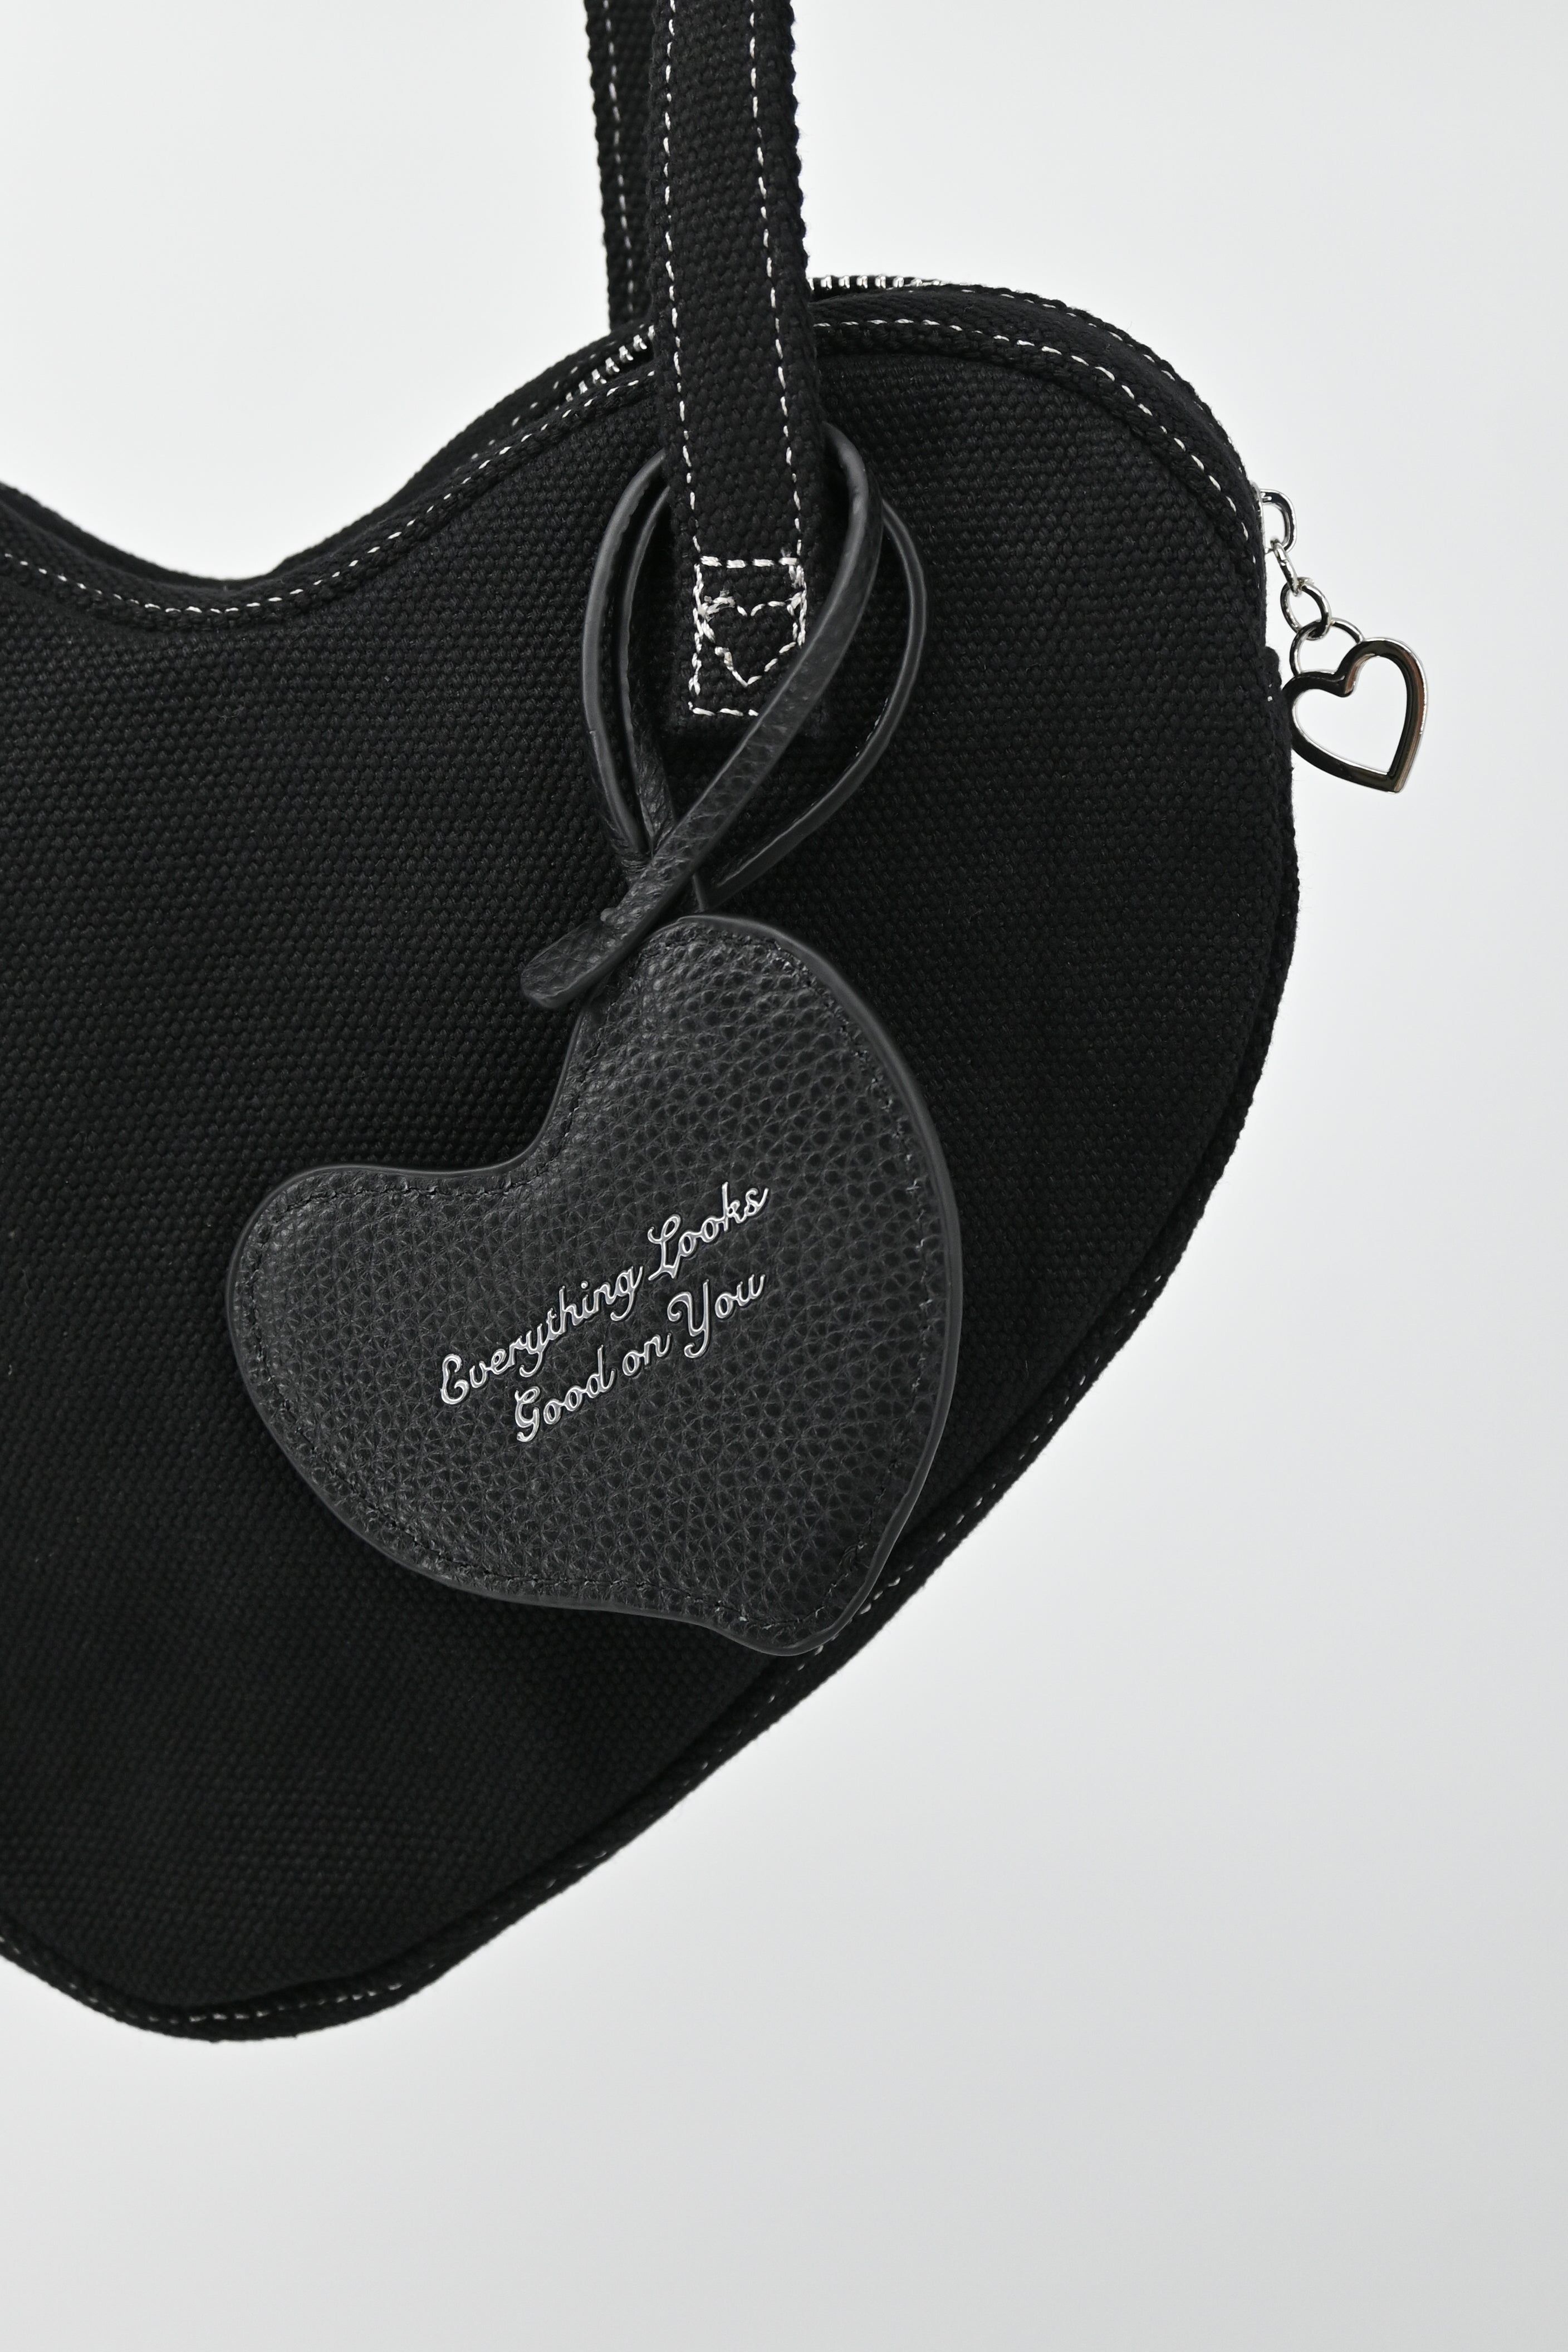 “Everything Looks Good on You” Leather Heart Mirror (BLACK)